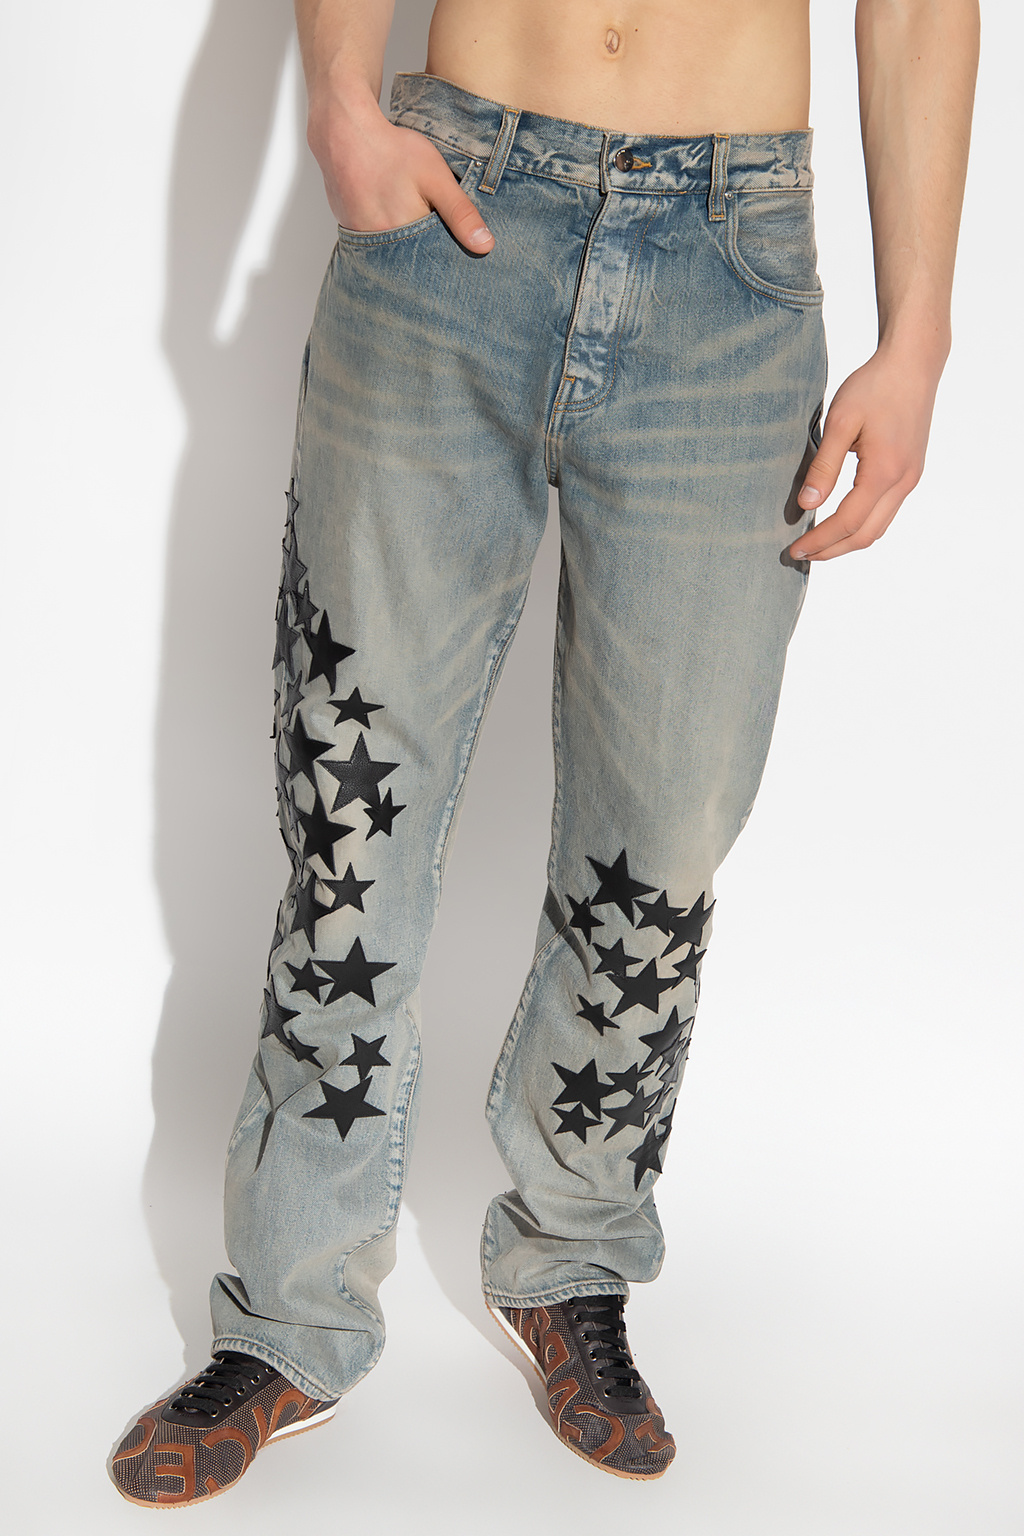 Amiri Patched jeans